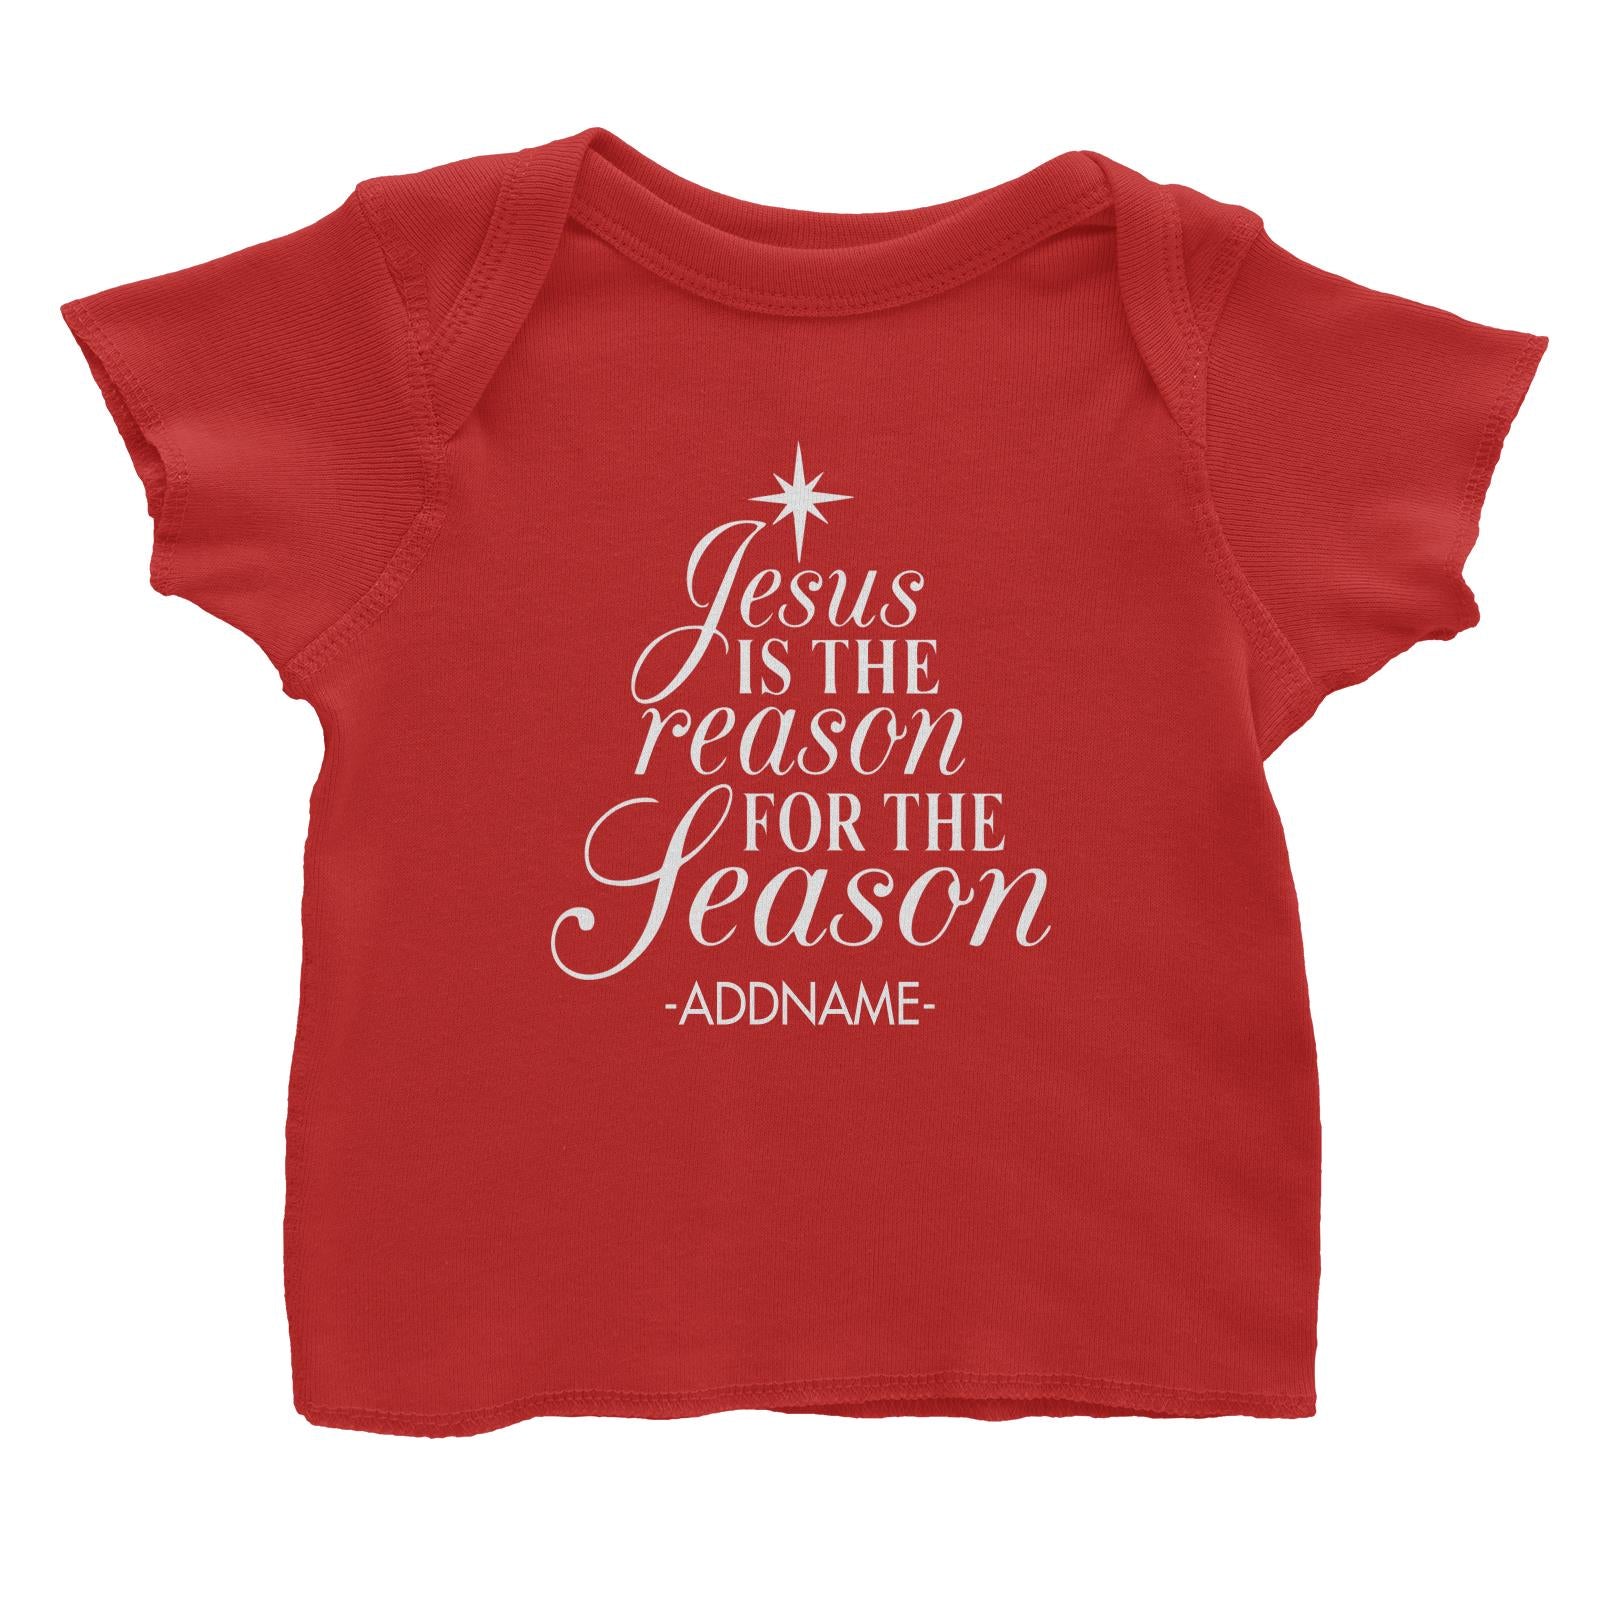 Jesus Is The Reason For The Season Addname Baby T-Shirt Christmas Personalizable Designs Lettering